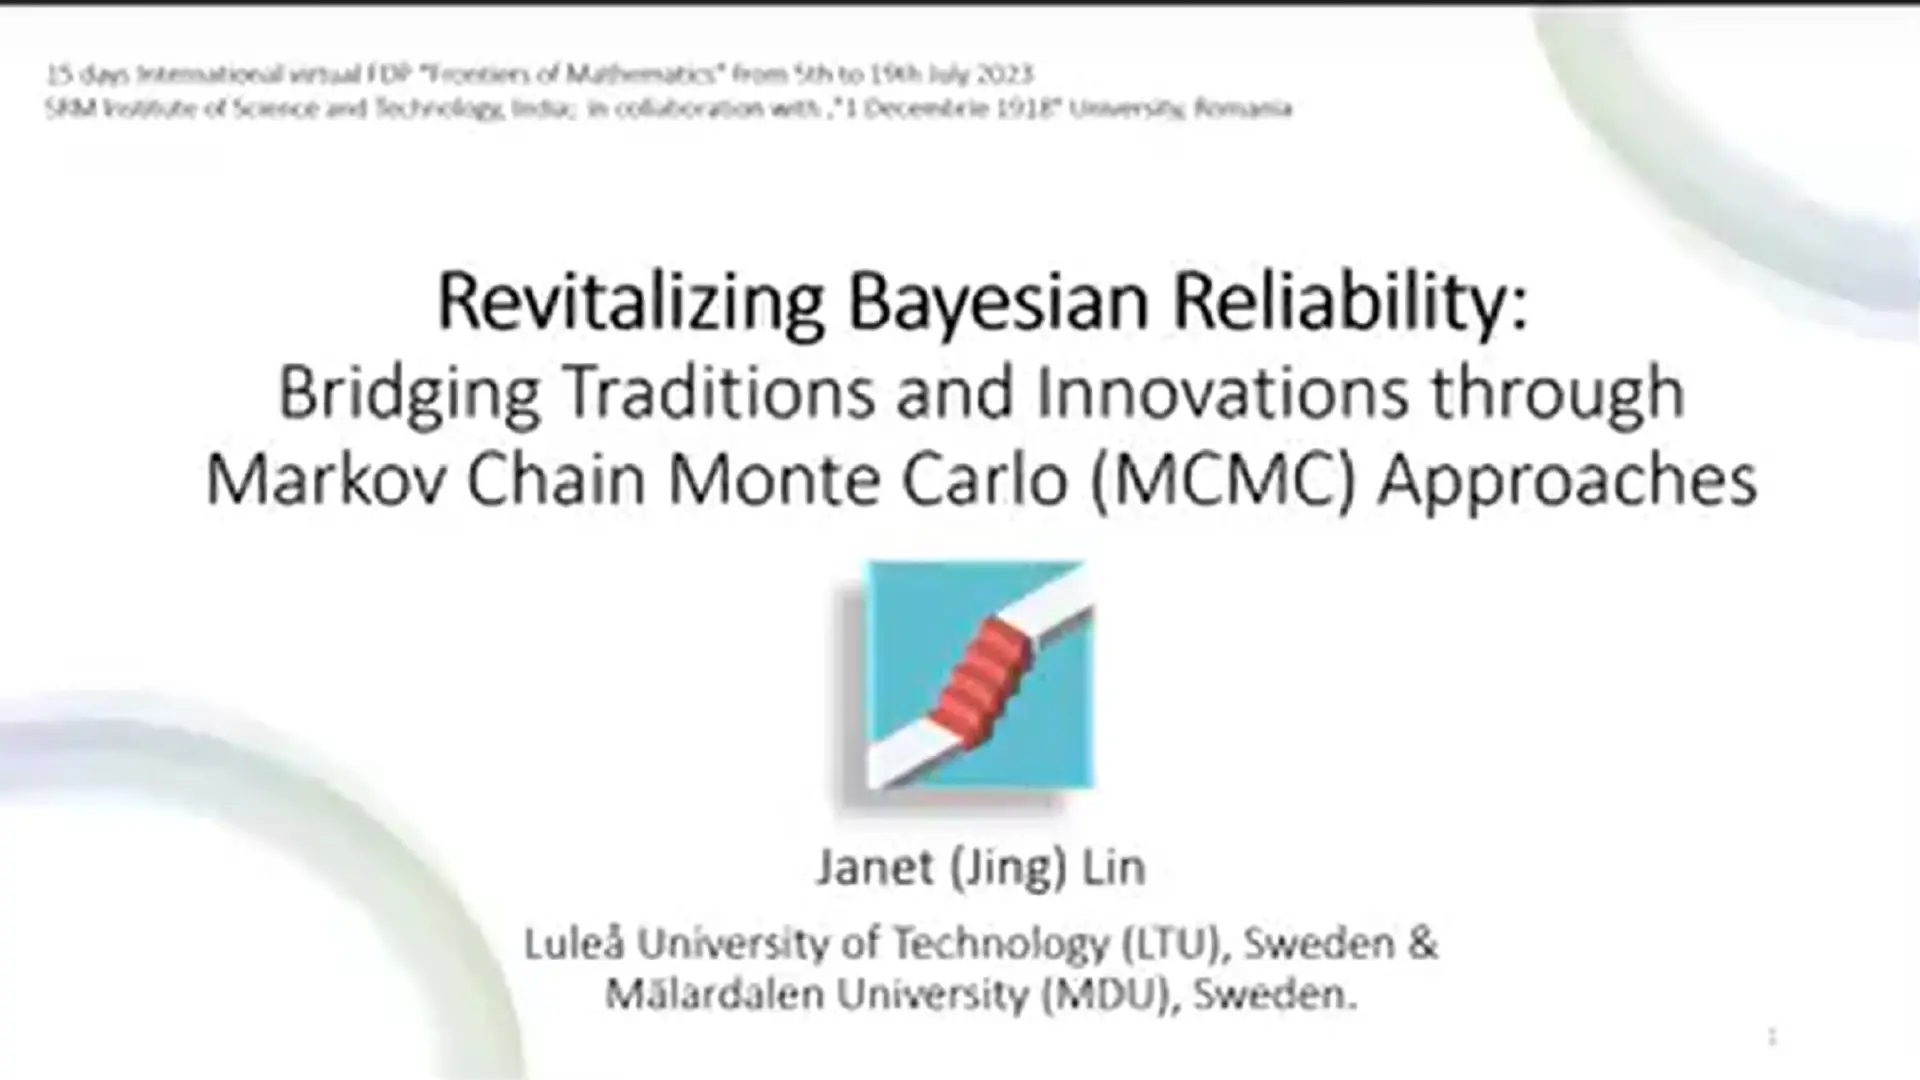 Revitalizing Bayesian Reliability: Bridging Traditions and Innovations Through Markov Chain Monte Carlo (MCMC) Approaches